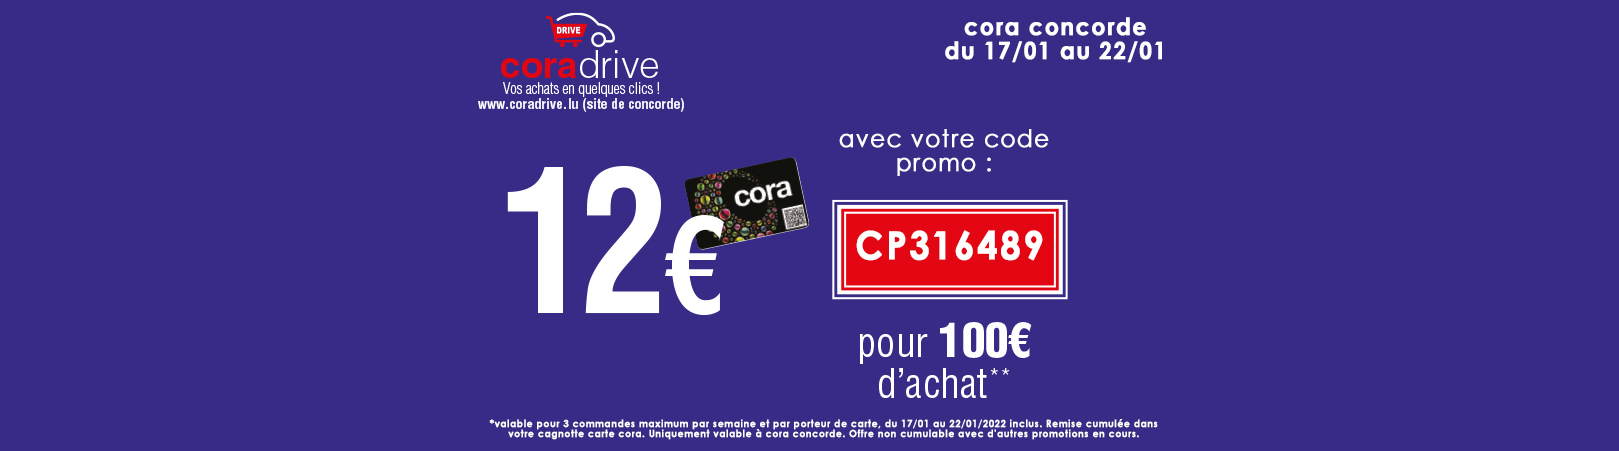 Offre coradrive